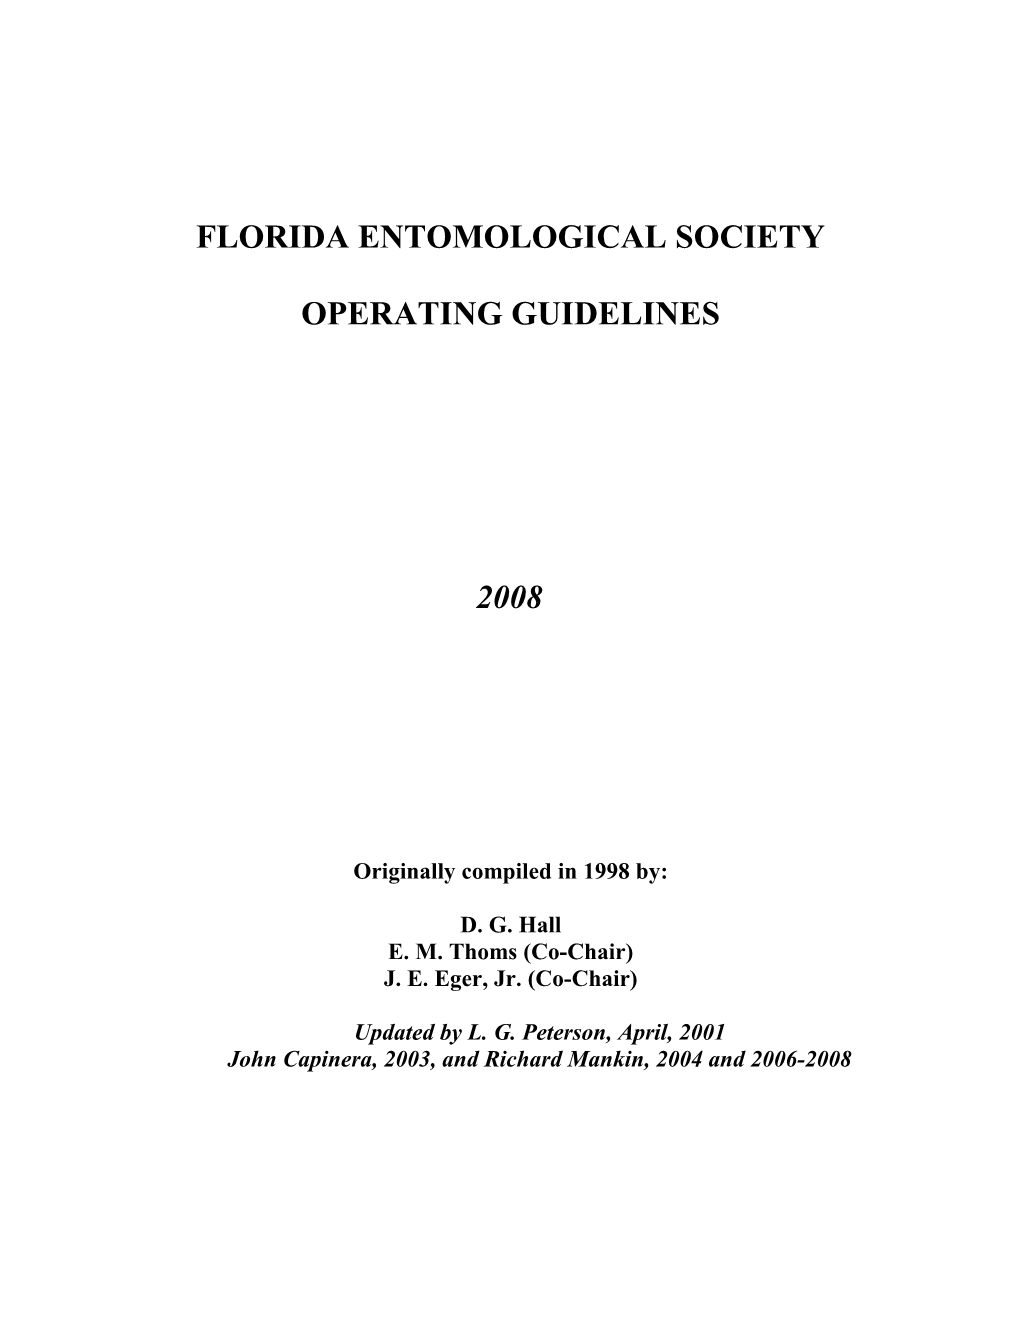 FES Operating Guidelines